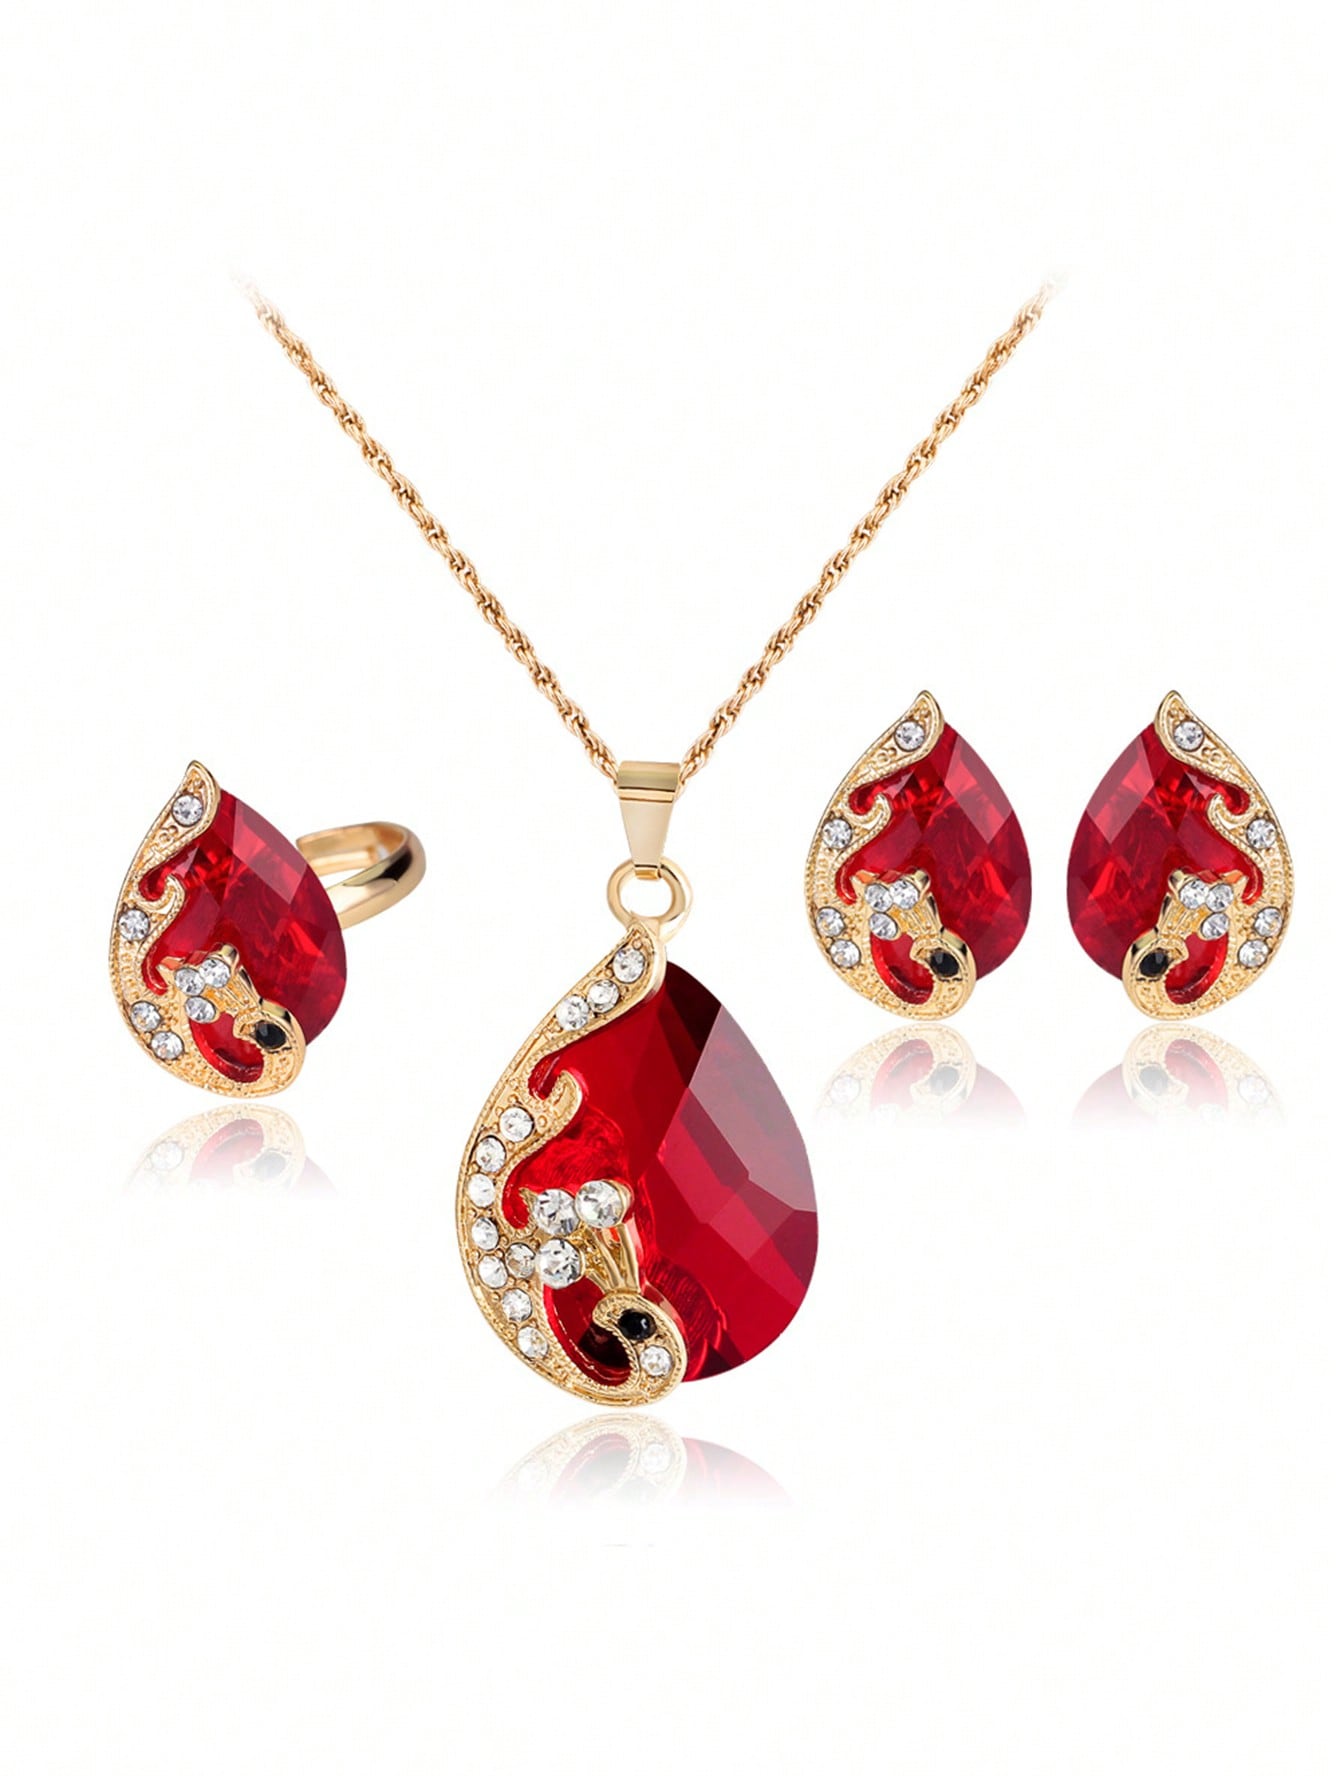 4pcs/set Fashion Copper Alloy Peacock Detail Water-drop Decor Jewelry Set For Women For Daily Life